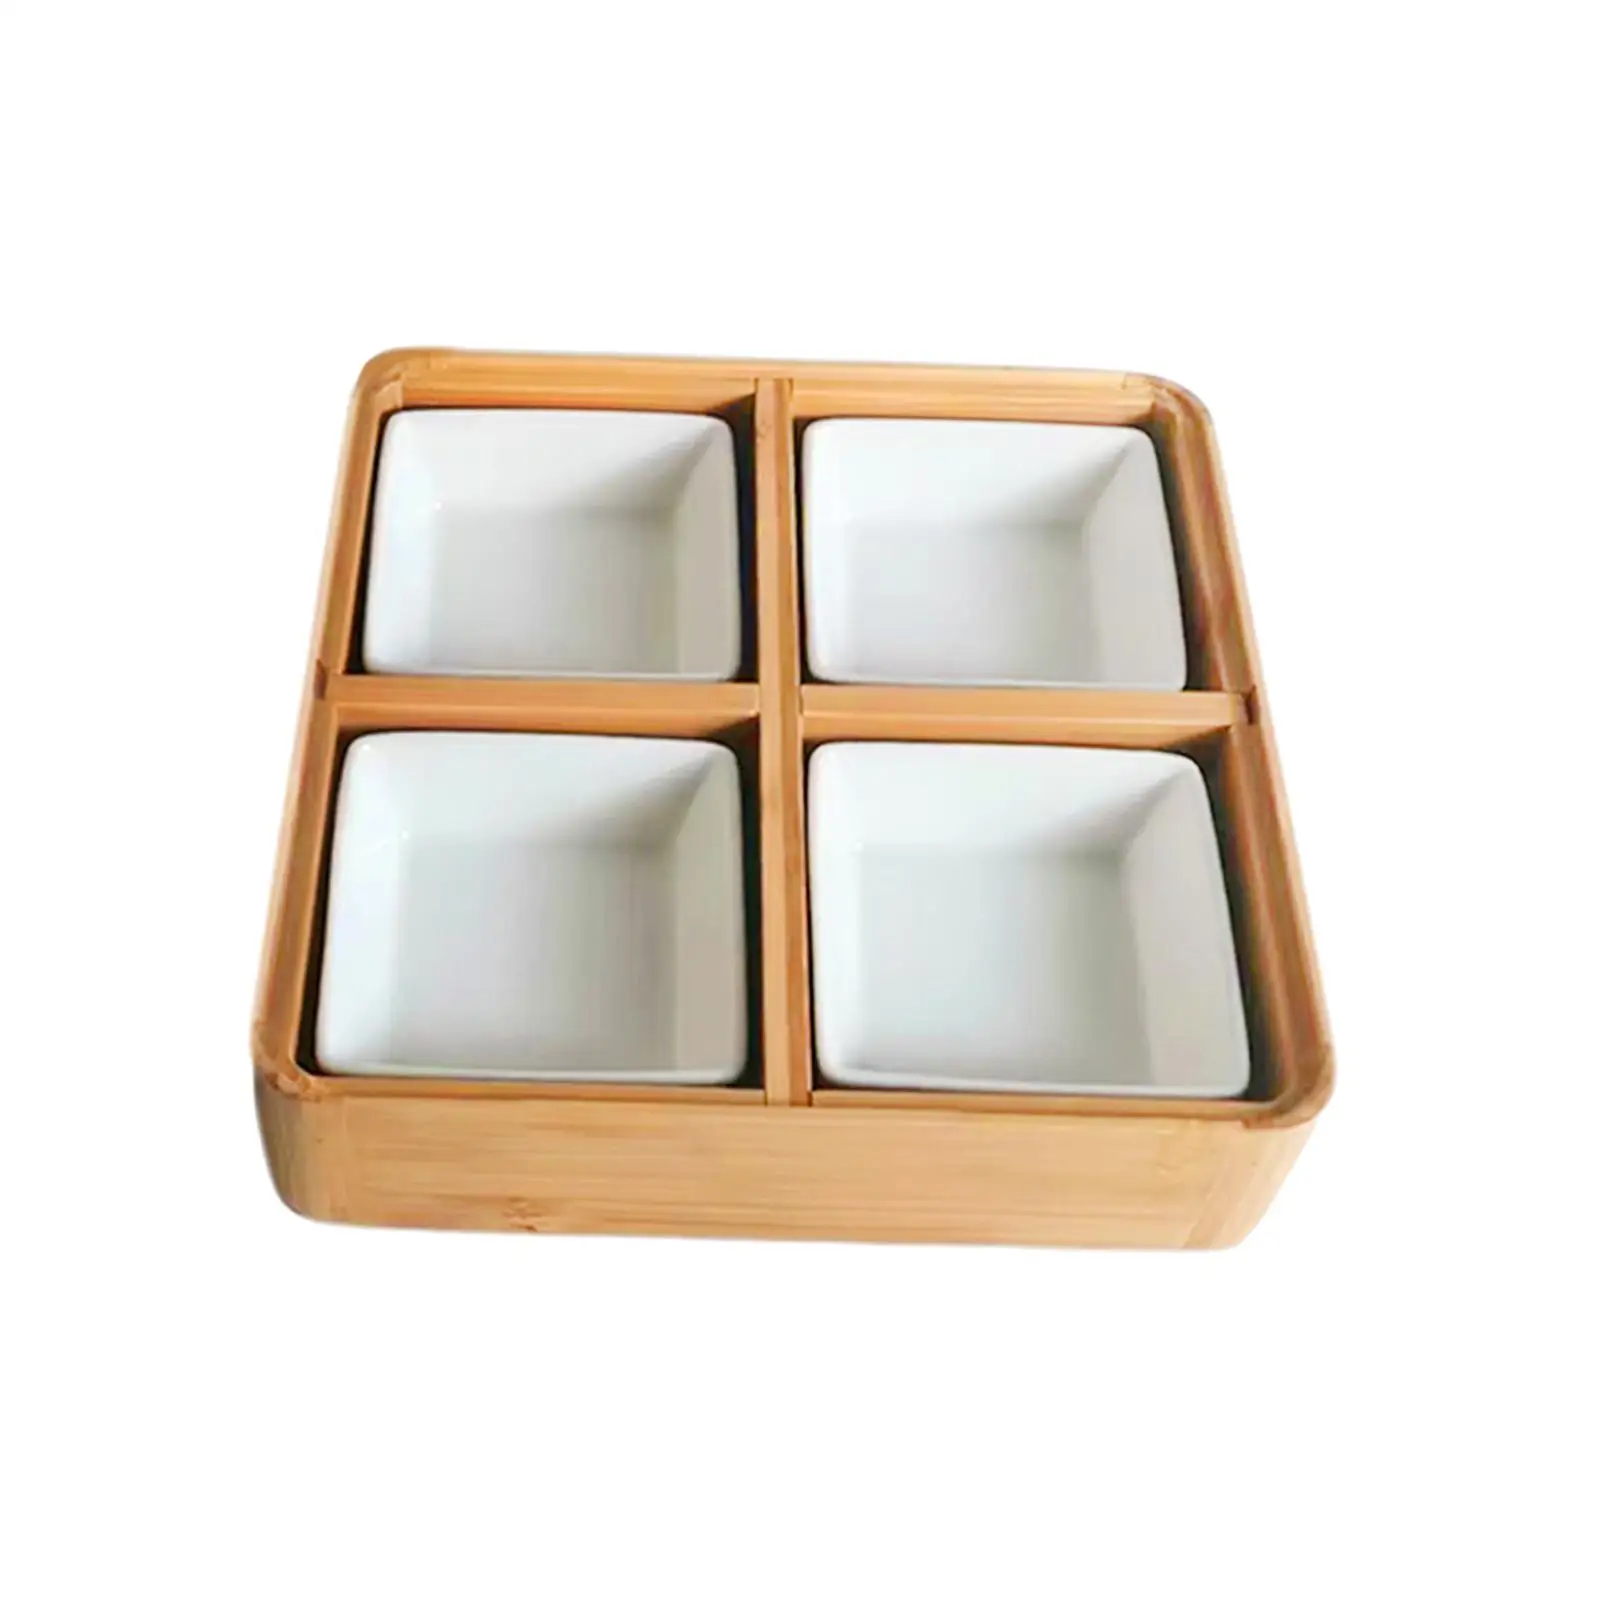 Divided Serving Tray Candy Bowl with Dividers Bamboo Nut and Candy Serving Tray for Holidays Caterers Dips Cured Meat Chips